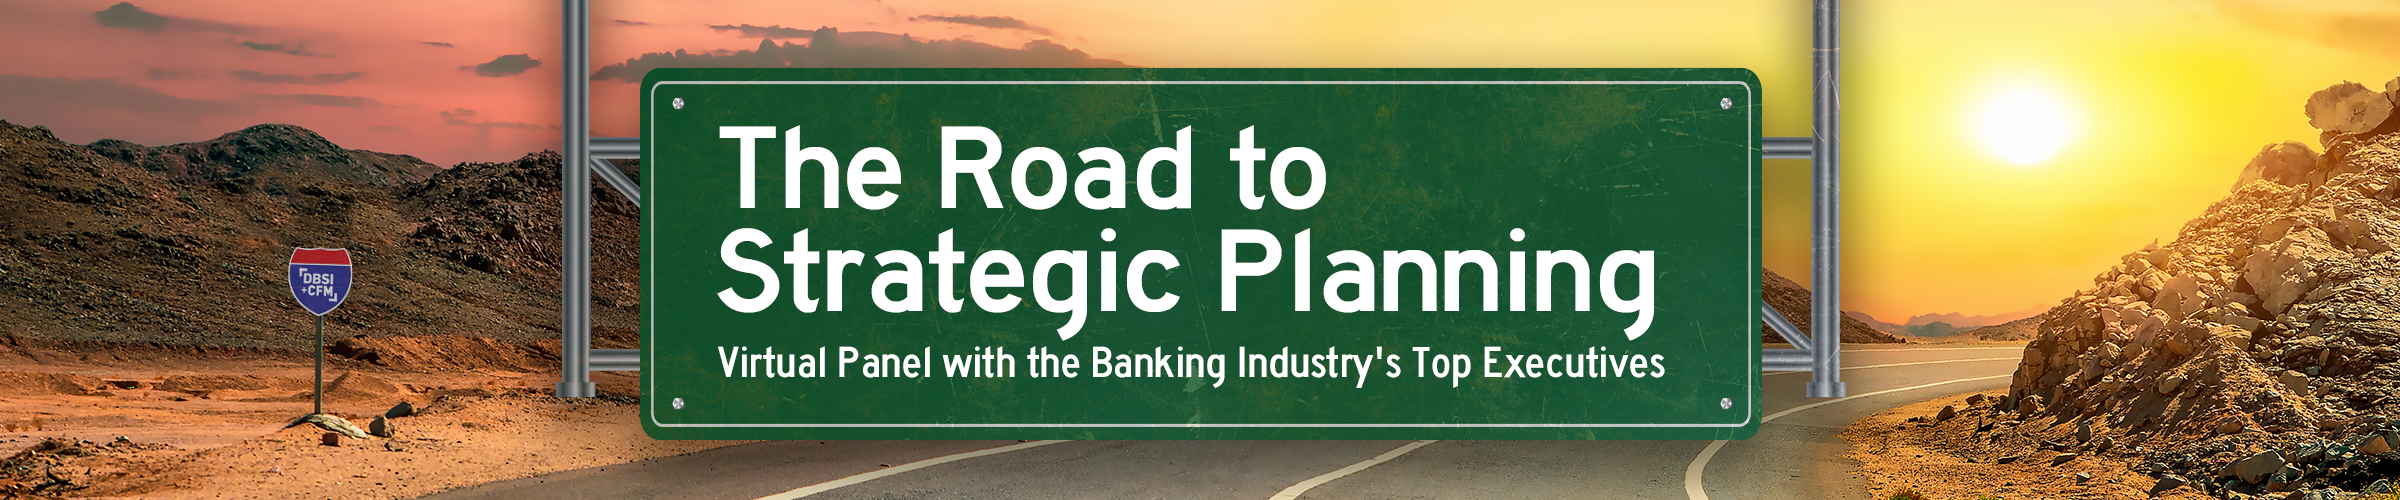 The Road To Strategic Planning